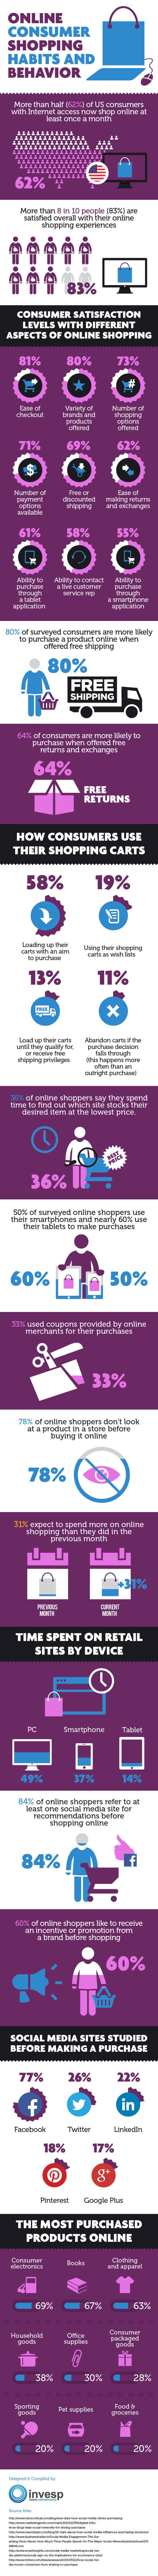 Online Consumer Shopping Habits and Behavior – Statistics and Trends